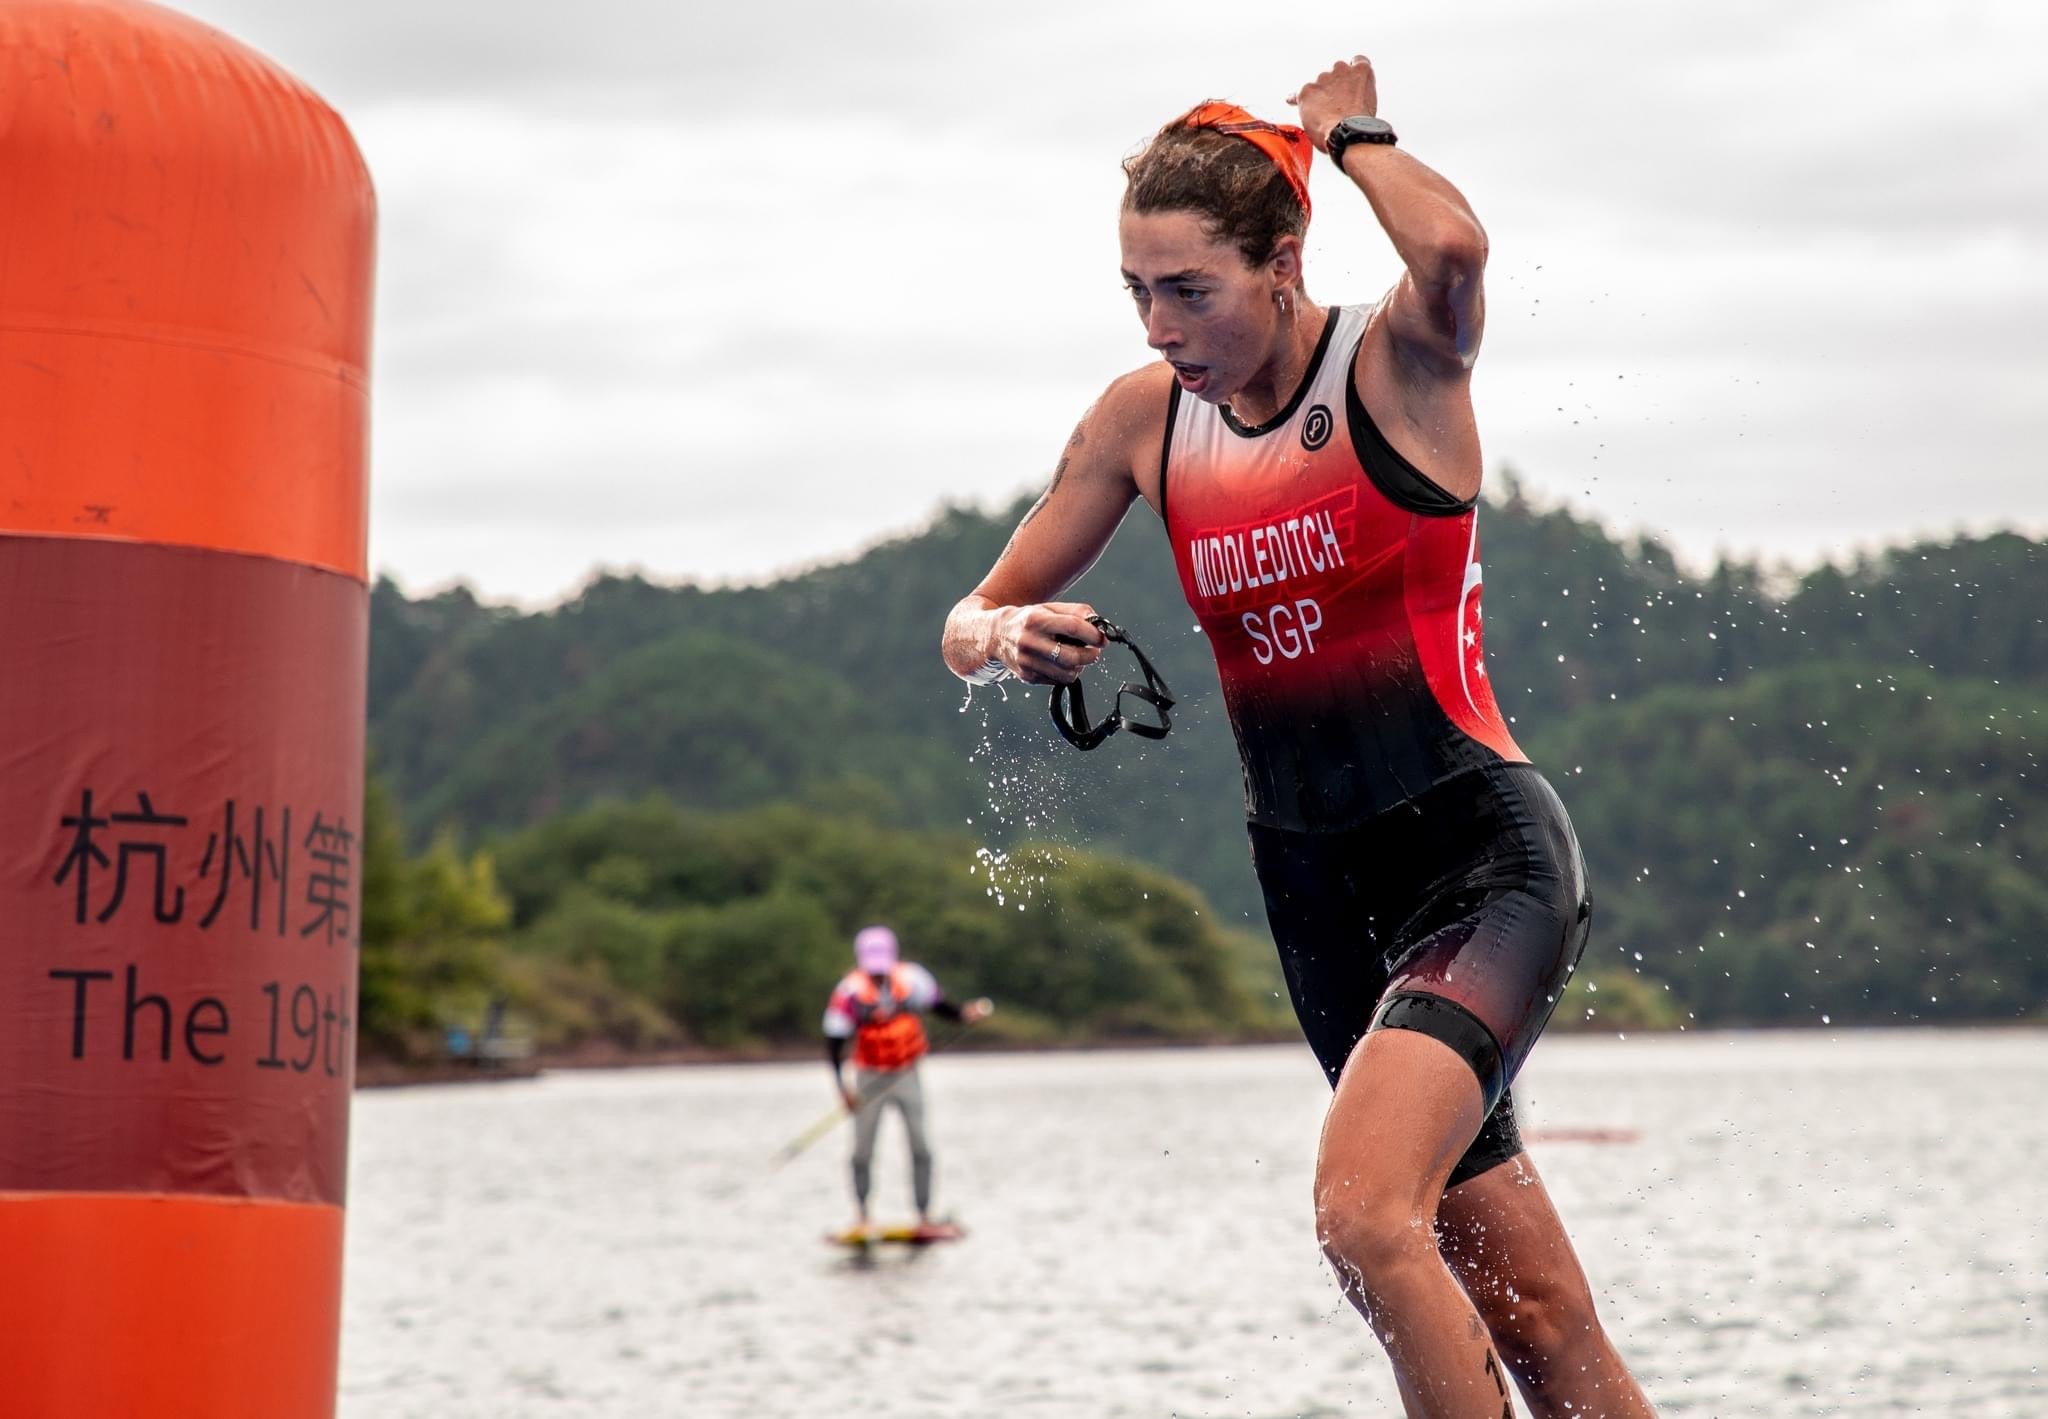 Louisa Middleditch: A Triathlon Journey from Singapore to the World